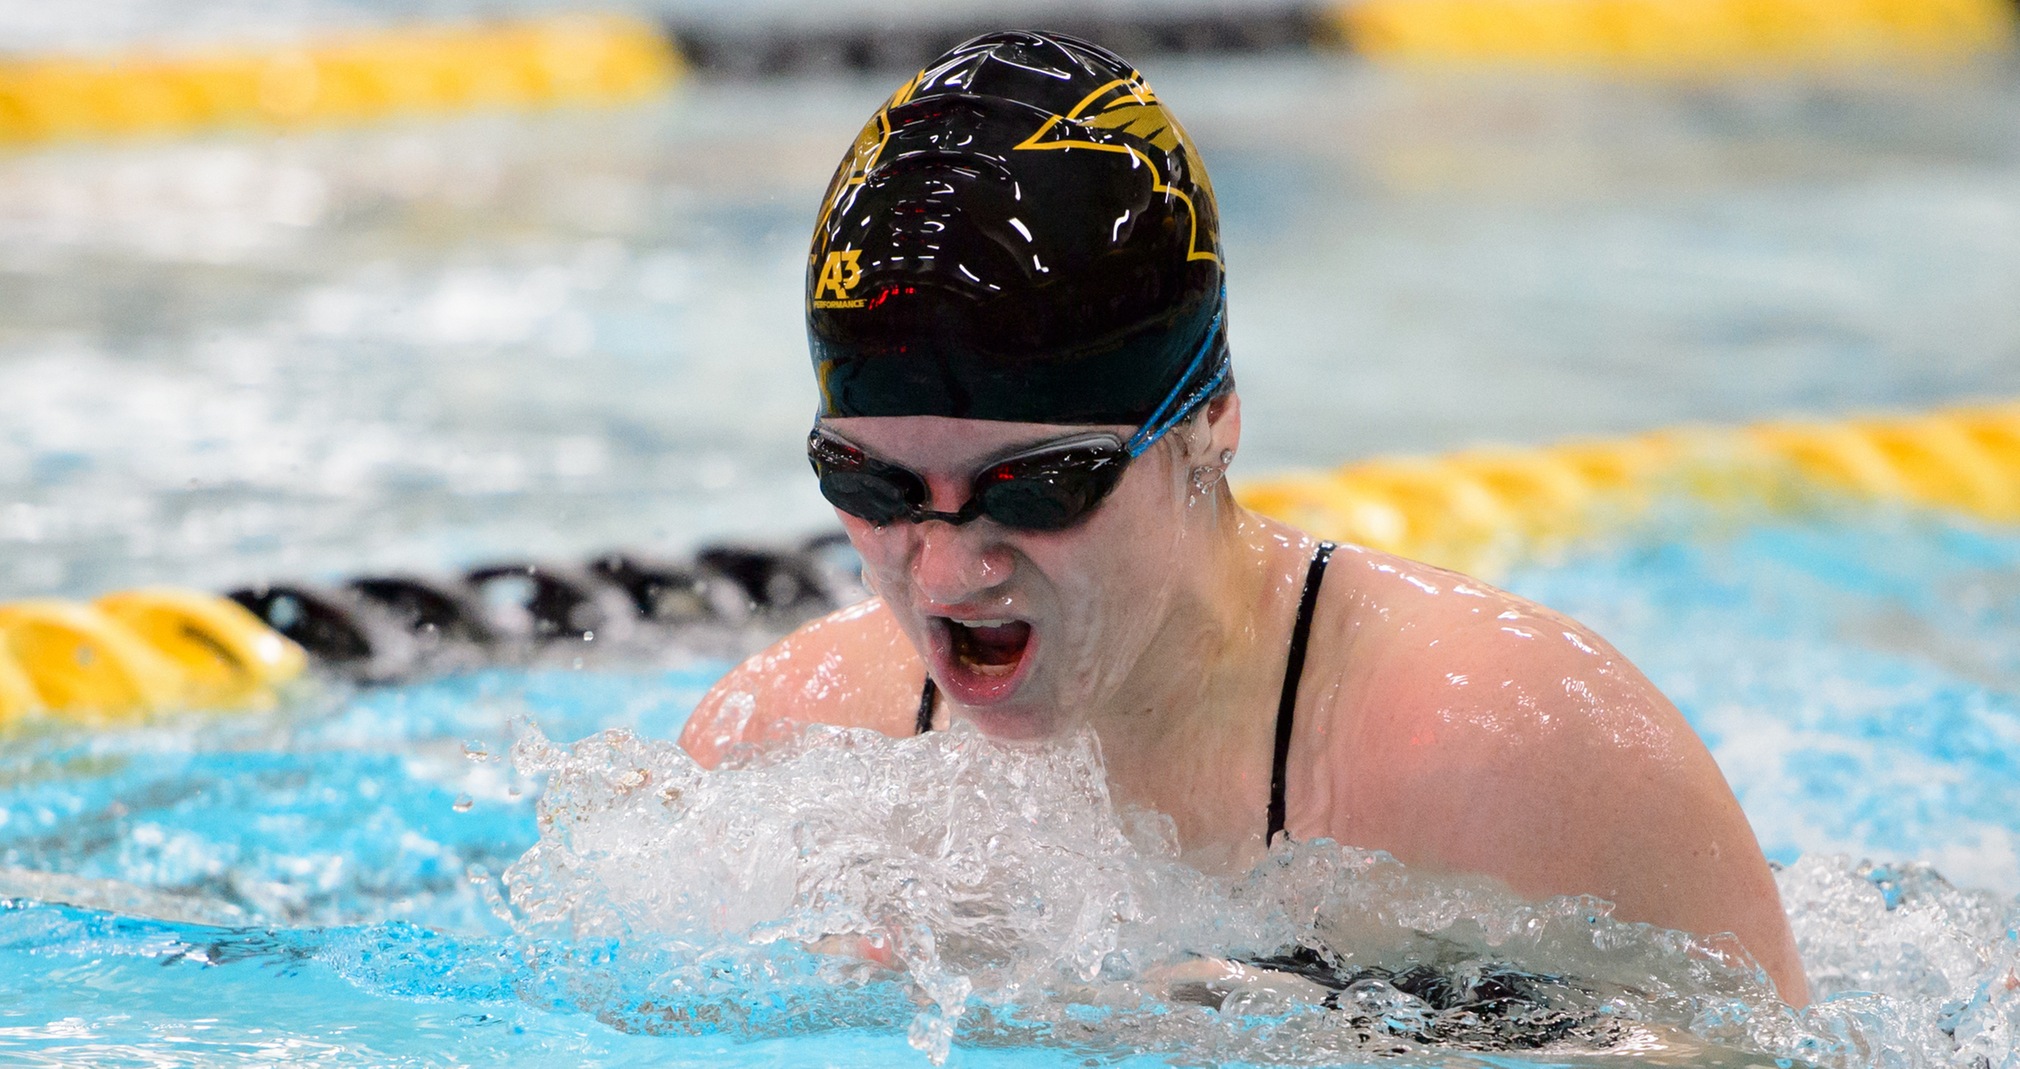 Rebecca Birriel placed third in the 100-yard breaststroke and fourth in individual medley races at 200 and 400 yards.